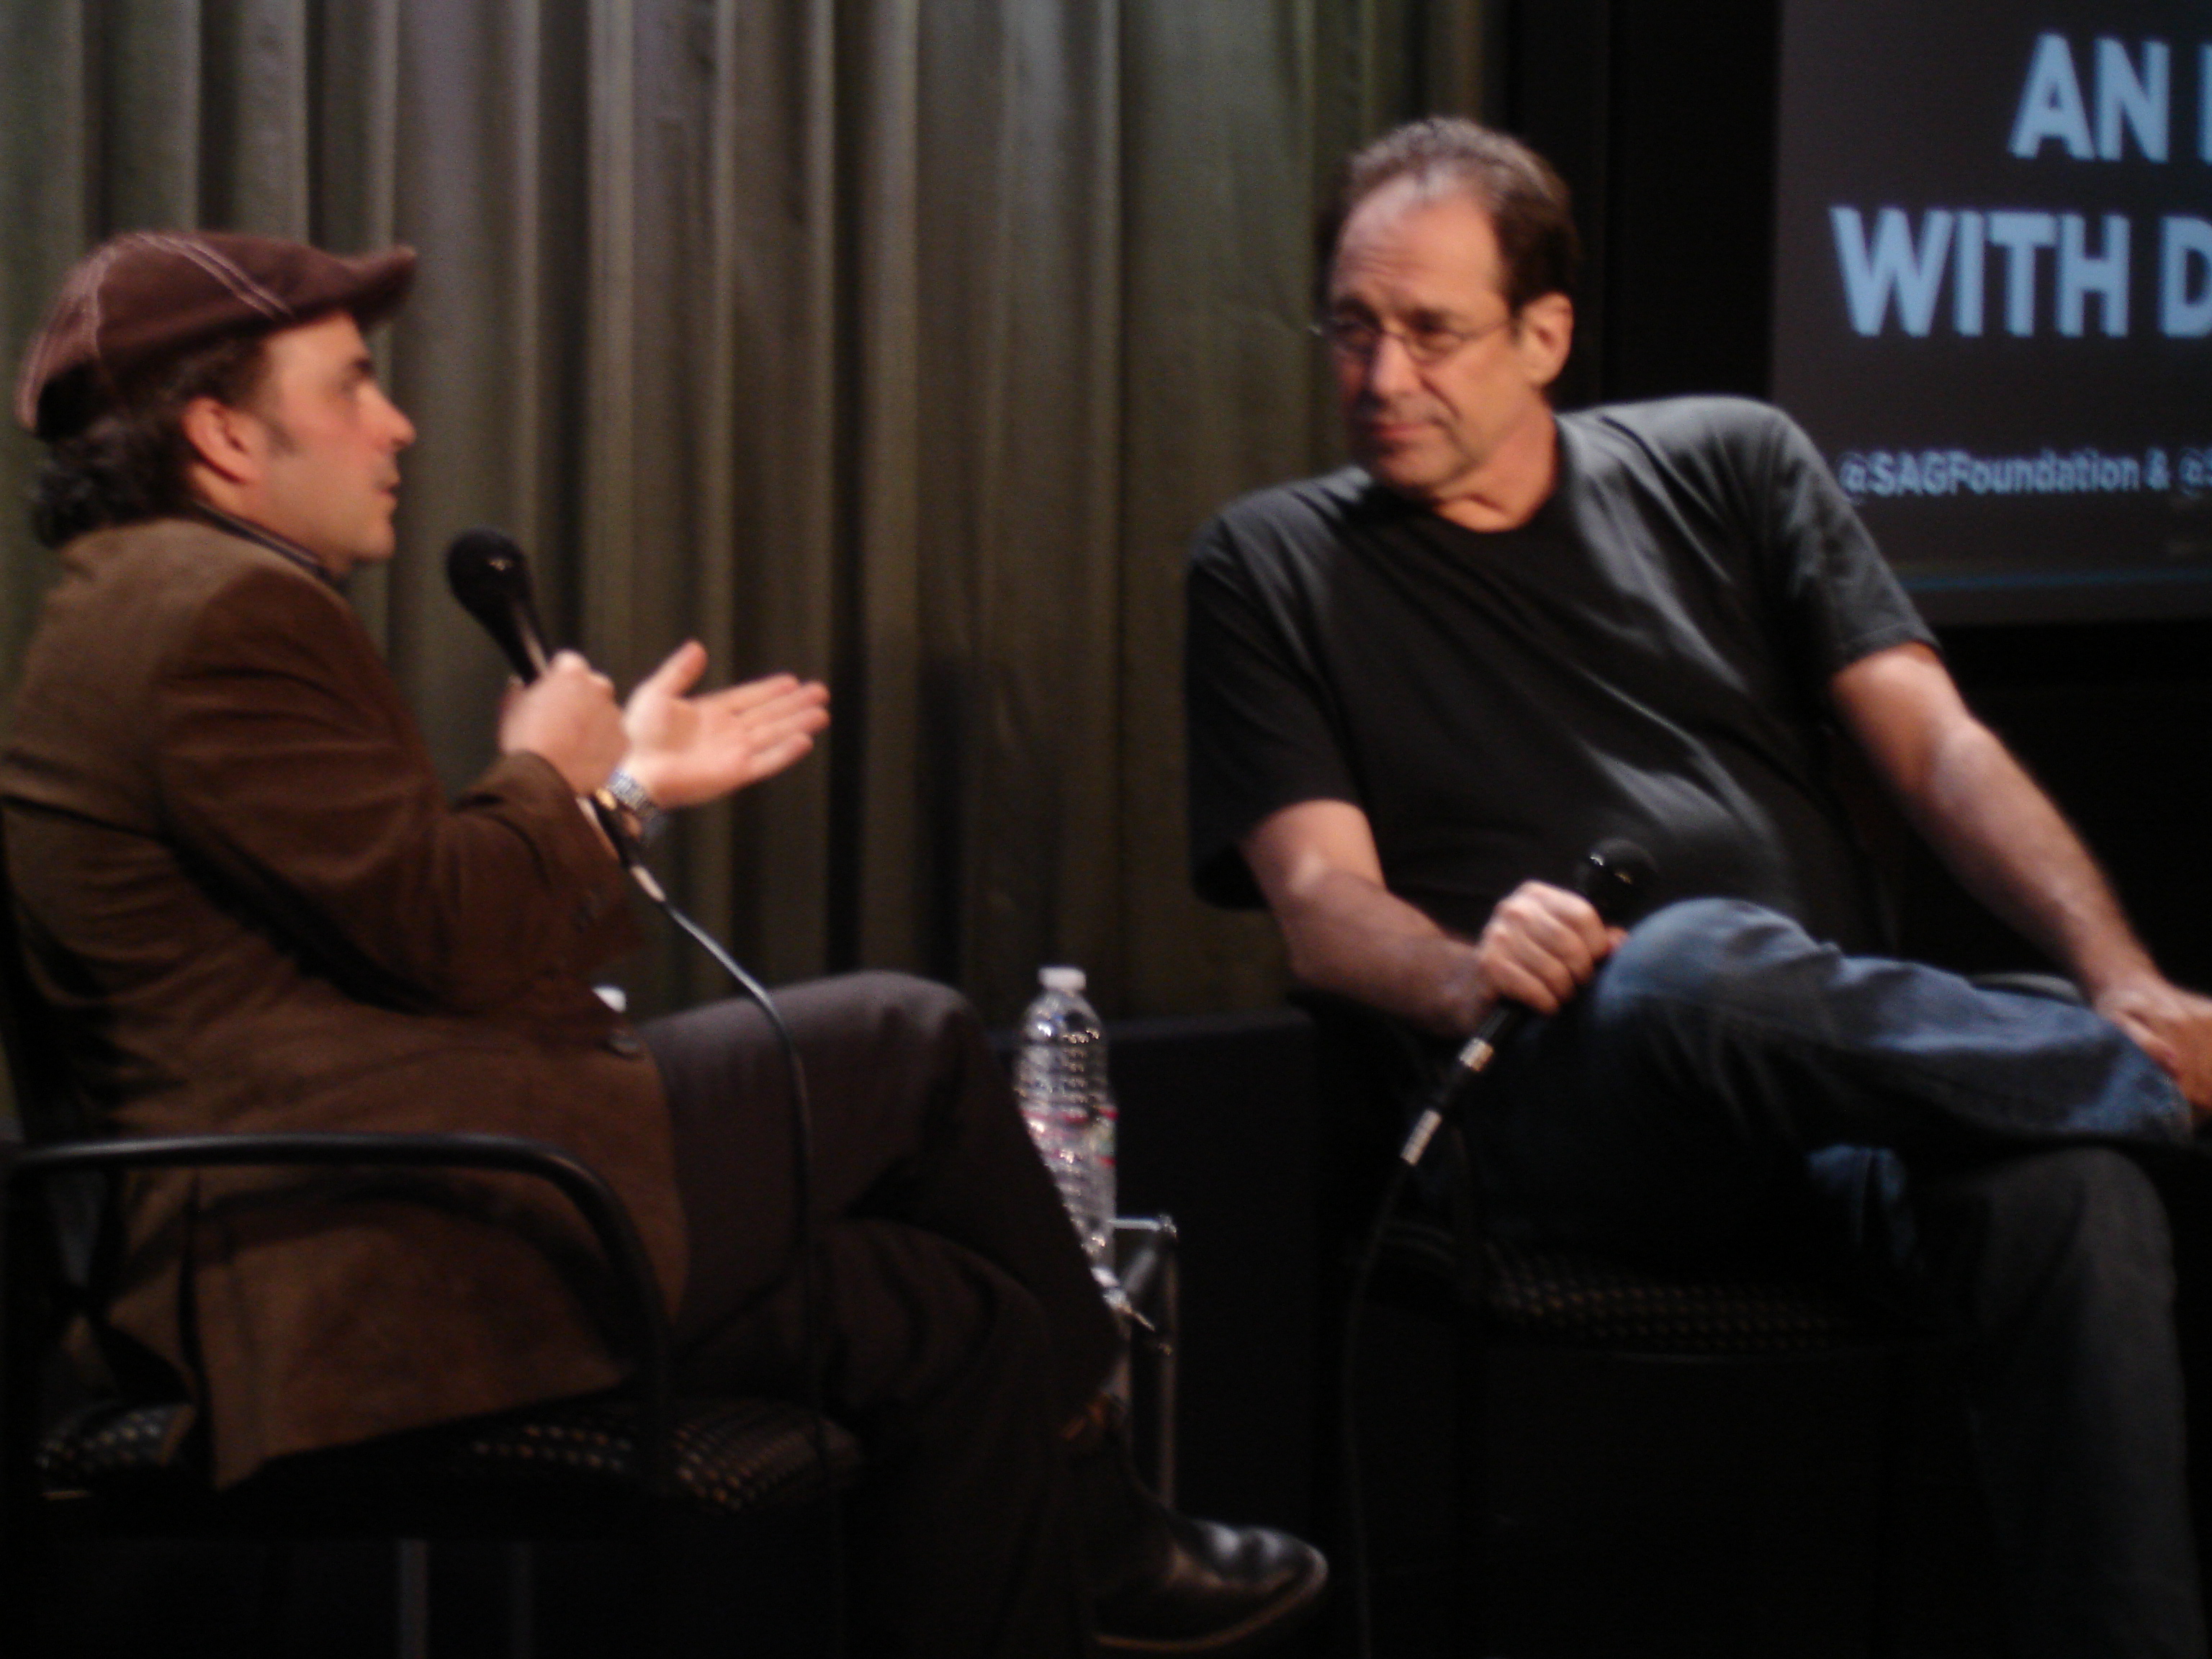 Michael moderates an evening with David Milch at SAG Hollywood.